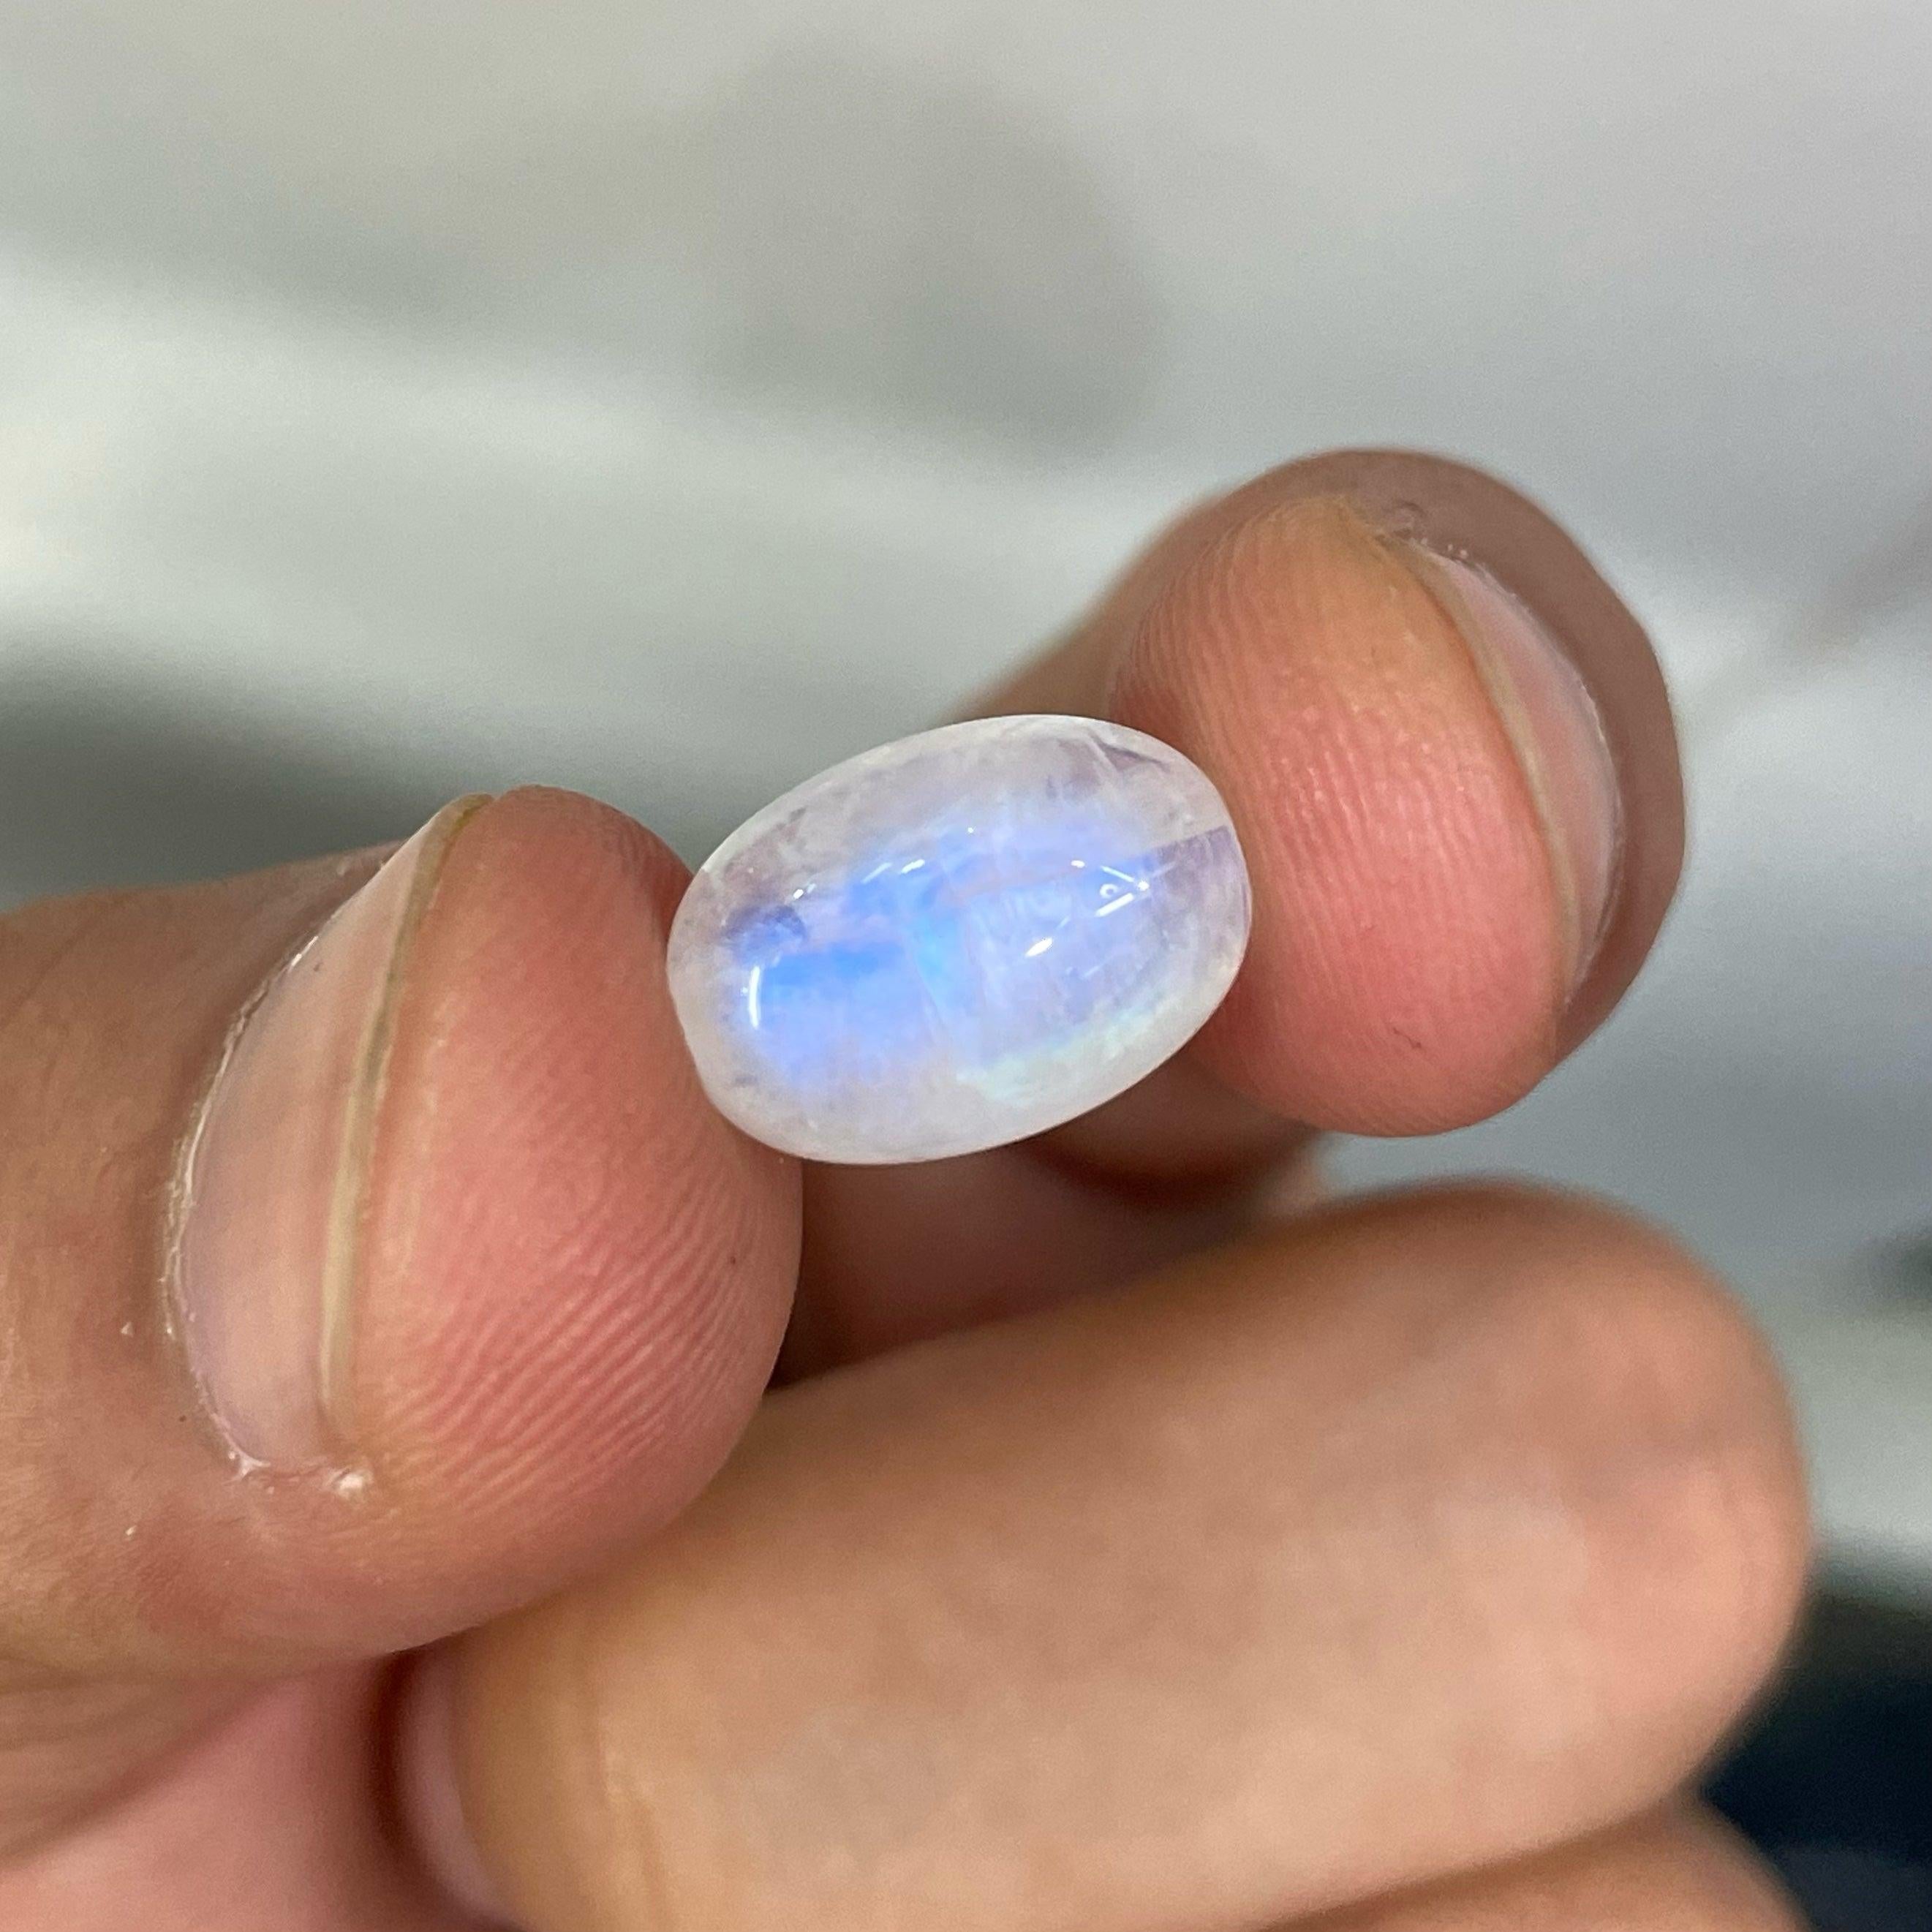 Beautiful Natural Moonstone Gemstone, available for sale at wholesale price, natural high-quality 5.95 carats flawless Included clarity, certified Moonstone from India.

Product Information:
GEMSTONE NAME: Beautiful Natural Moonstone